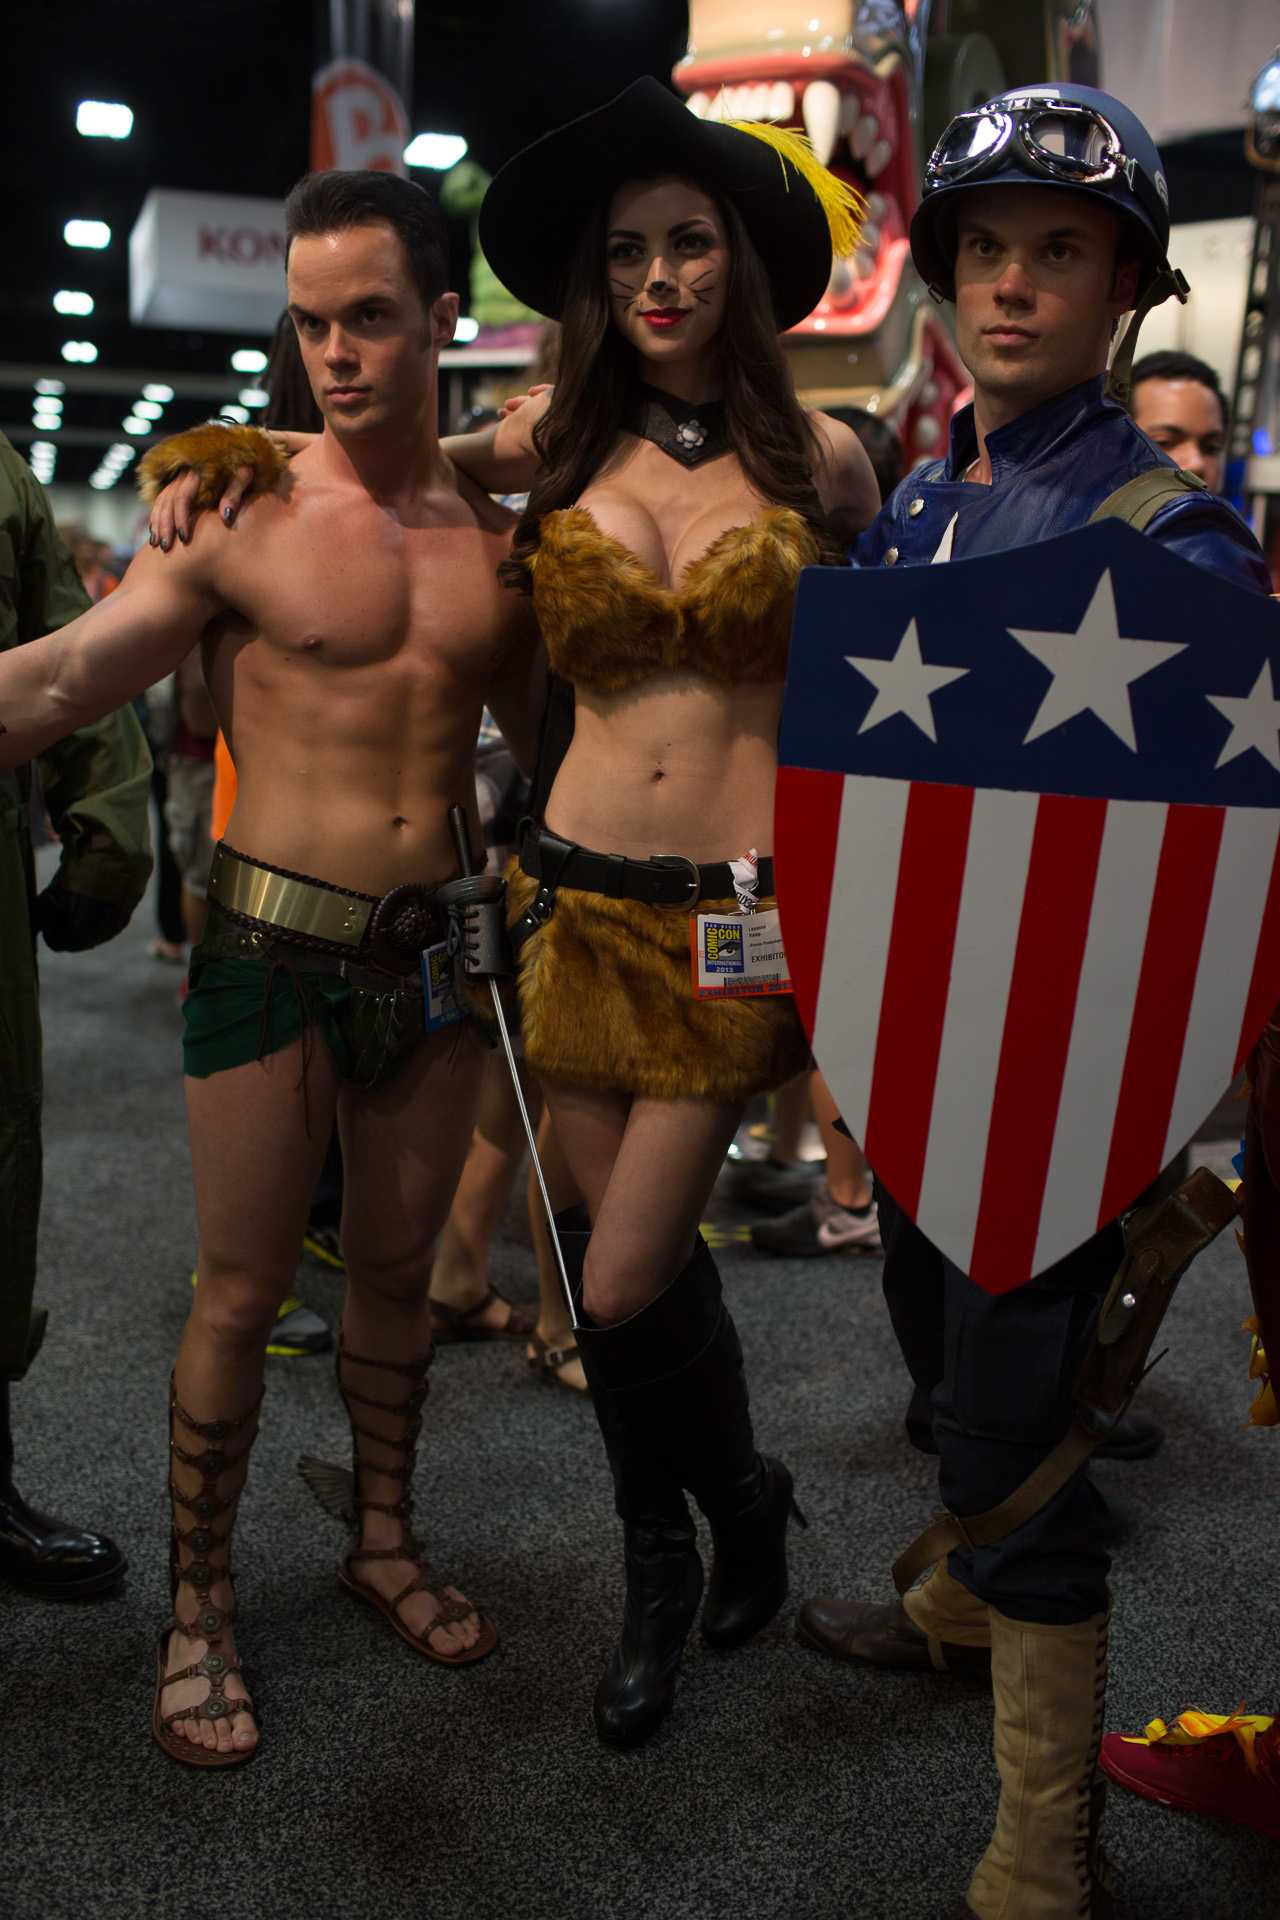 The Captain America costume is the one that I am talking about. Same with that lady in the middle